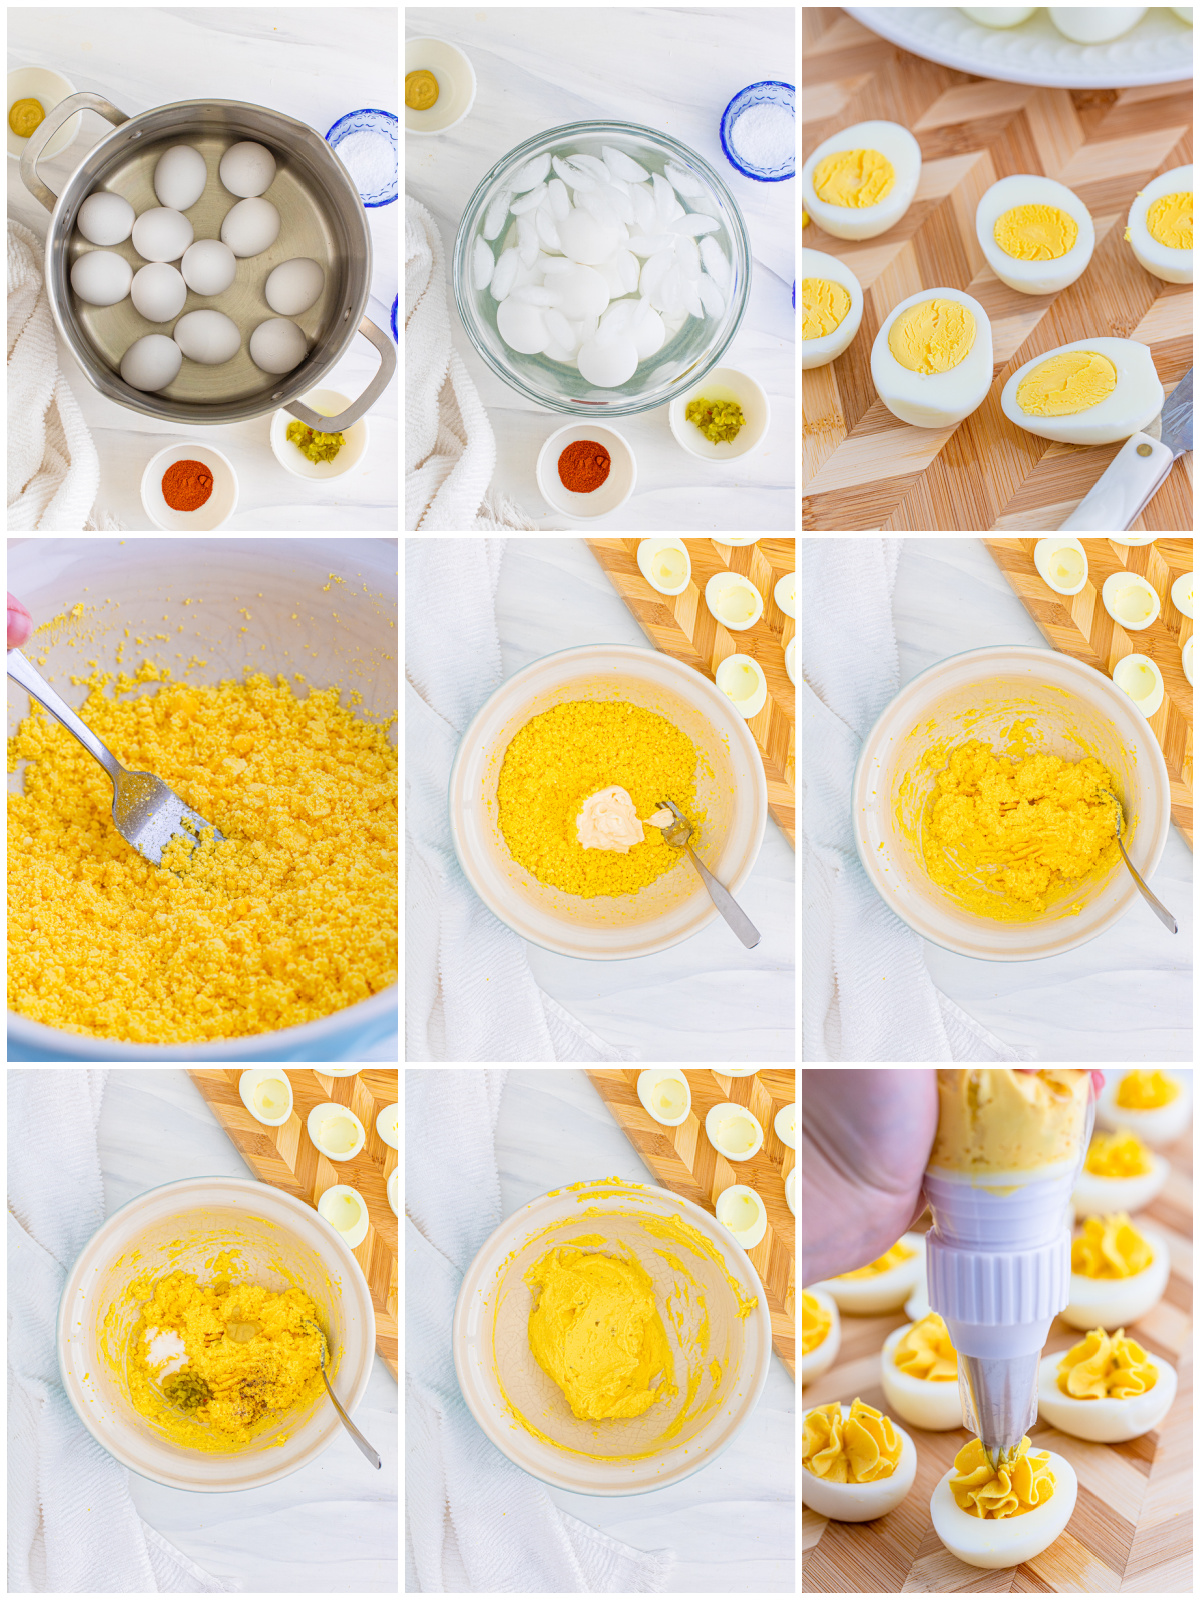 Step by step photos on how to make Easy Deviled Eggs.